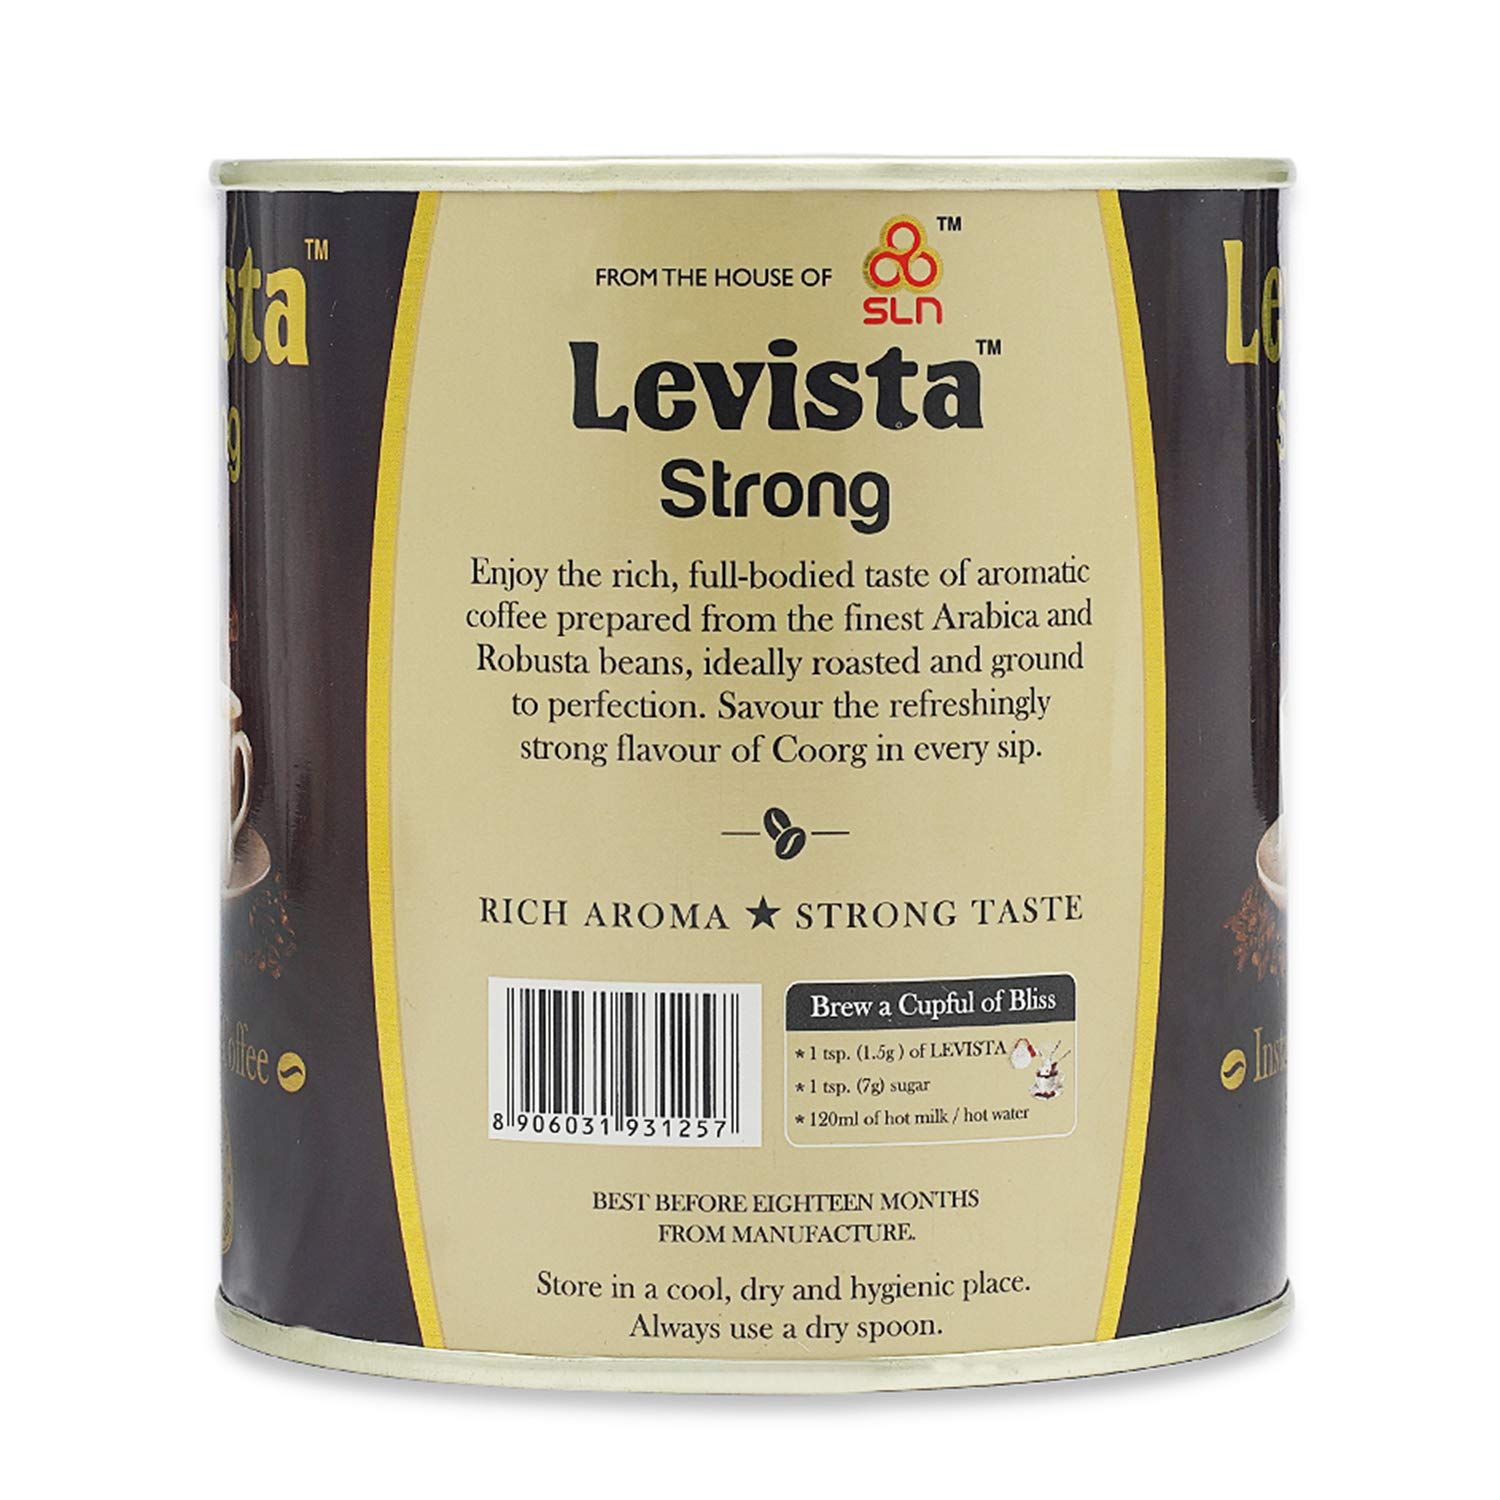 Levista Strong Instant Coffee Image